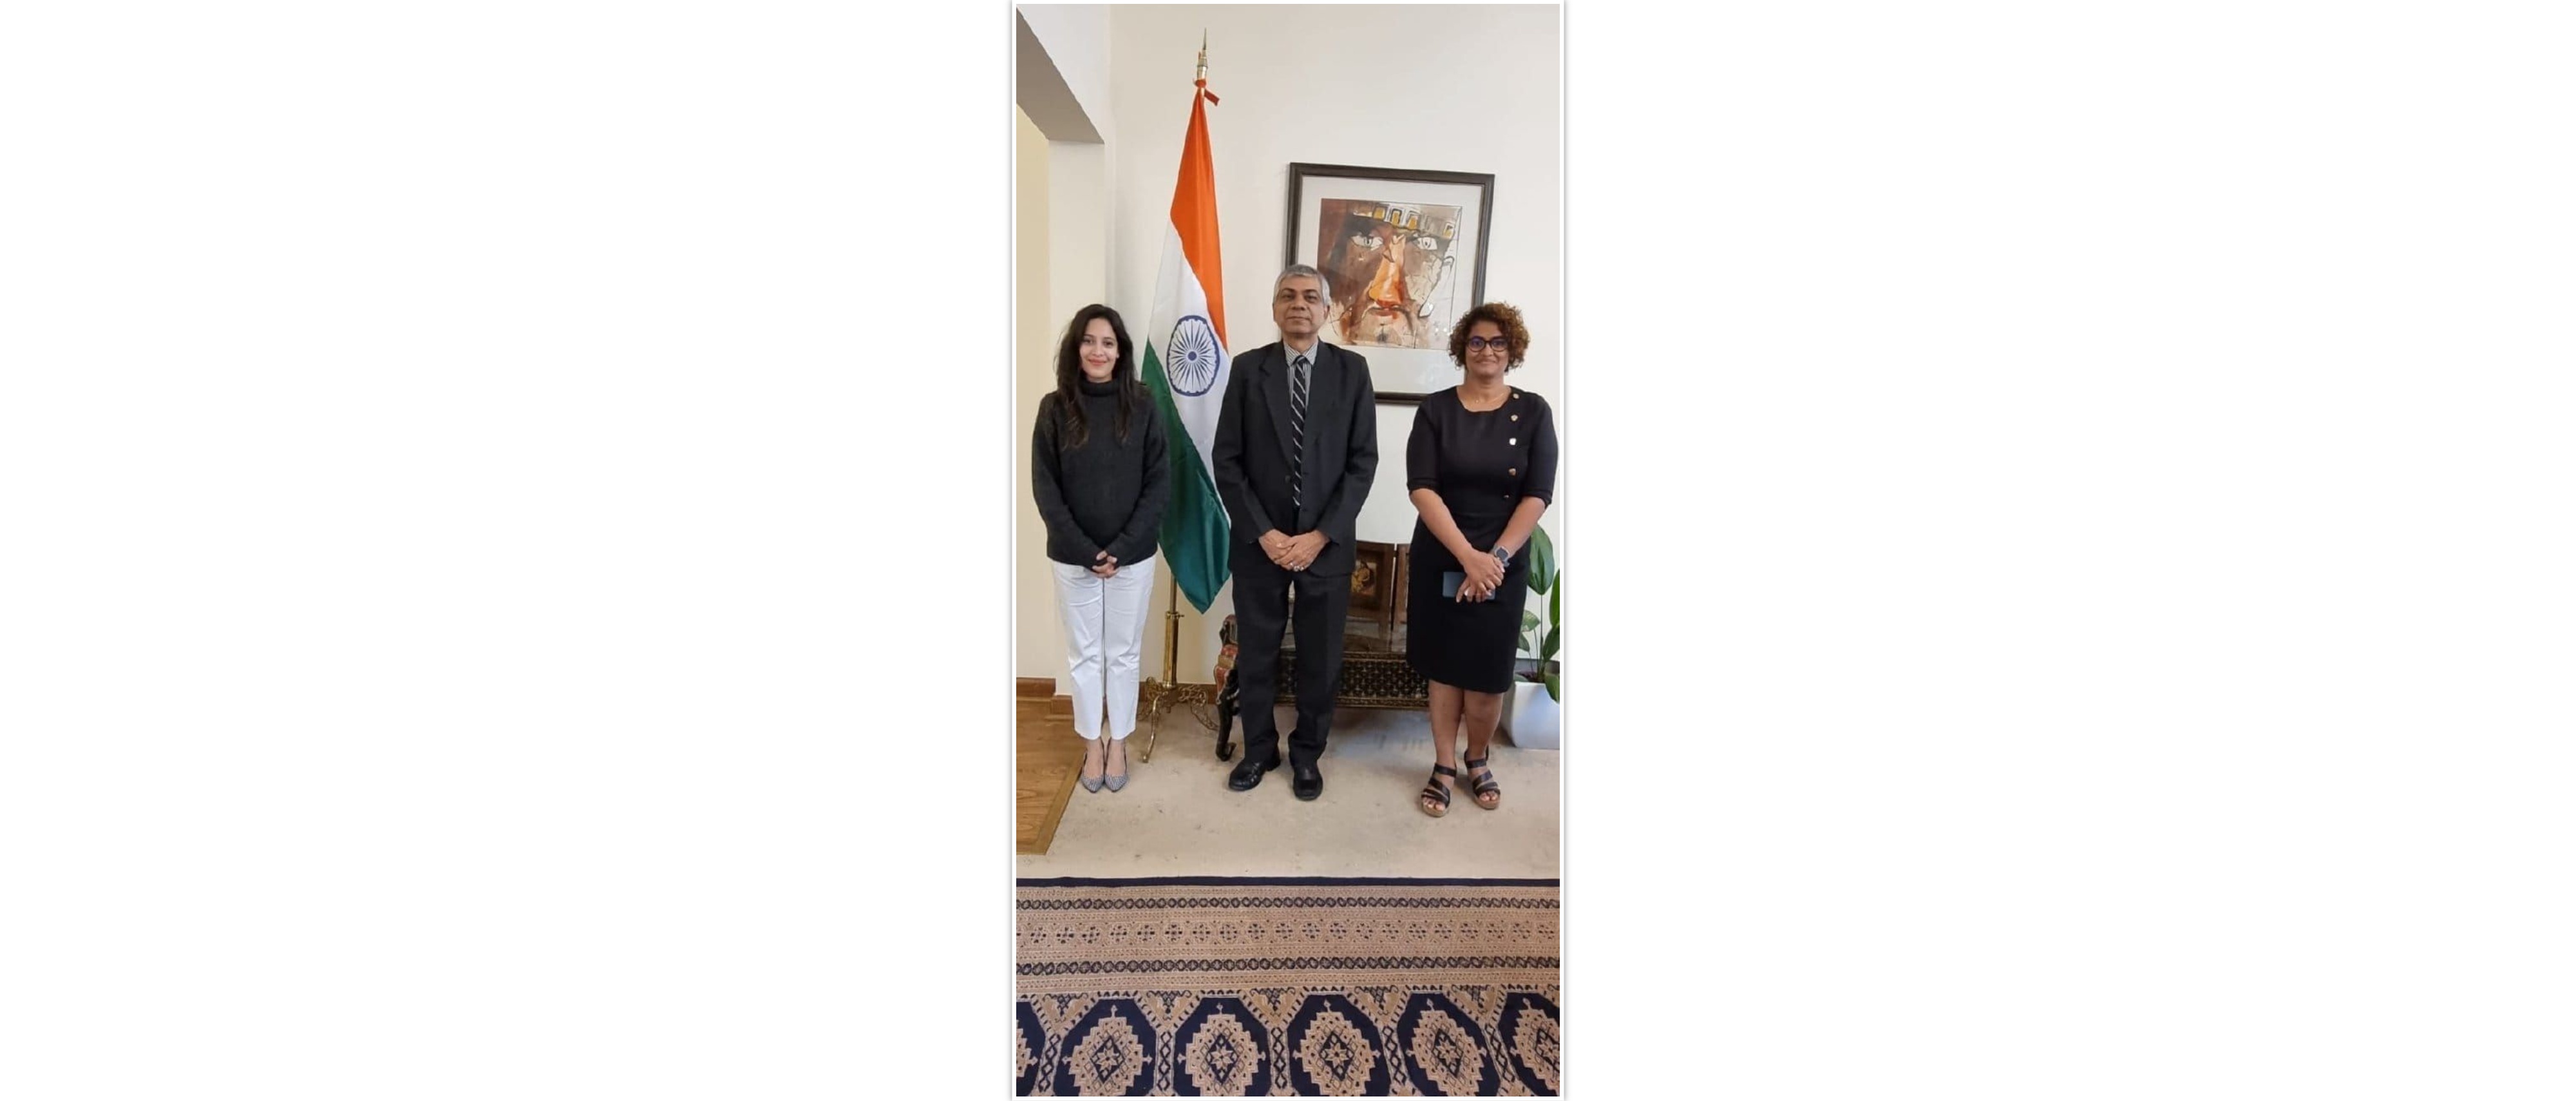  <div style="fcolor: #fff; font-weight: 600; font-size: 1.5em;">
<p style="font-size: 13.8px;">Ambassador Pankaj Sharma and Second Secretary Ms.Vallari Gaikwad held a meeting with Ms.Maria Francis, Incharge- Business Development Americas Region from National Payments Corporation of India (NPCI), International Payments Ltd.

Discussed possibilities of extending India's digital payment system UPI to México and Belize.
<br /><span style="text-align: center;">22 November 2022</span></p>
</div>